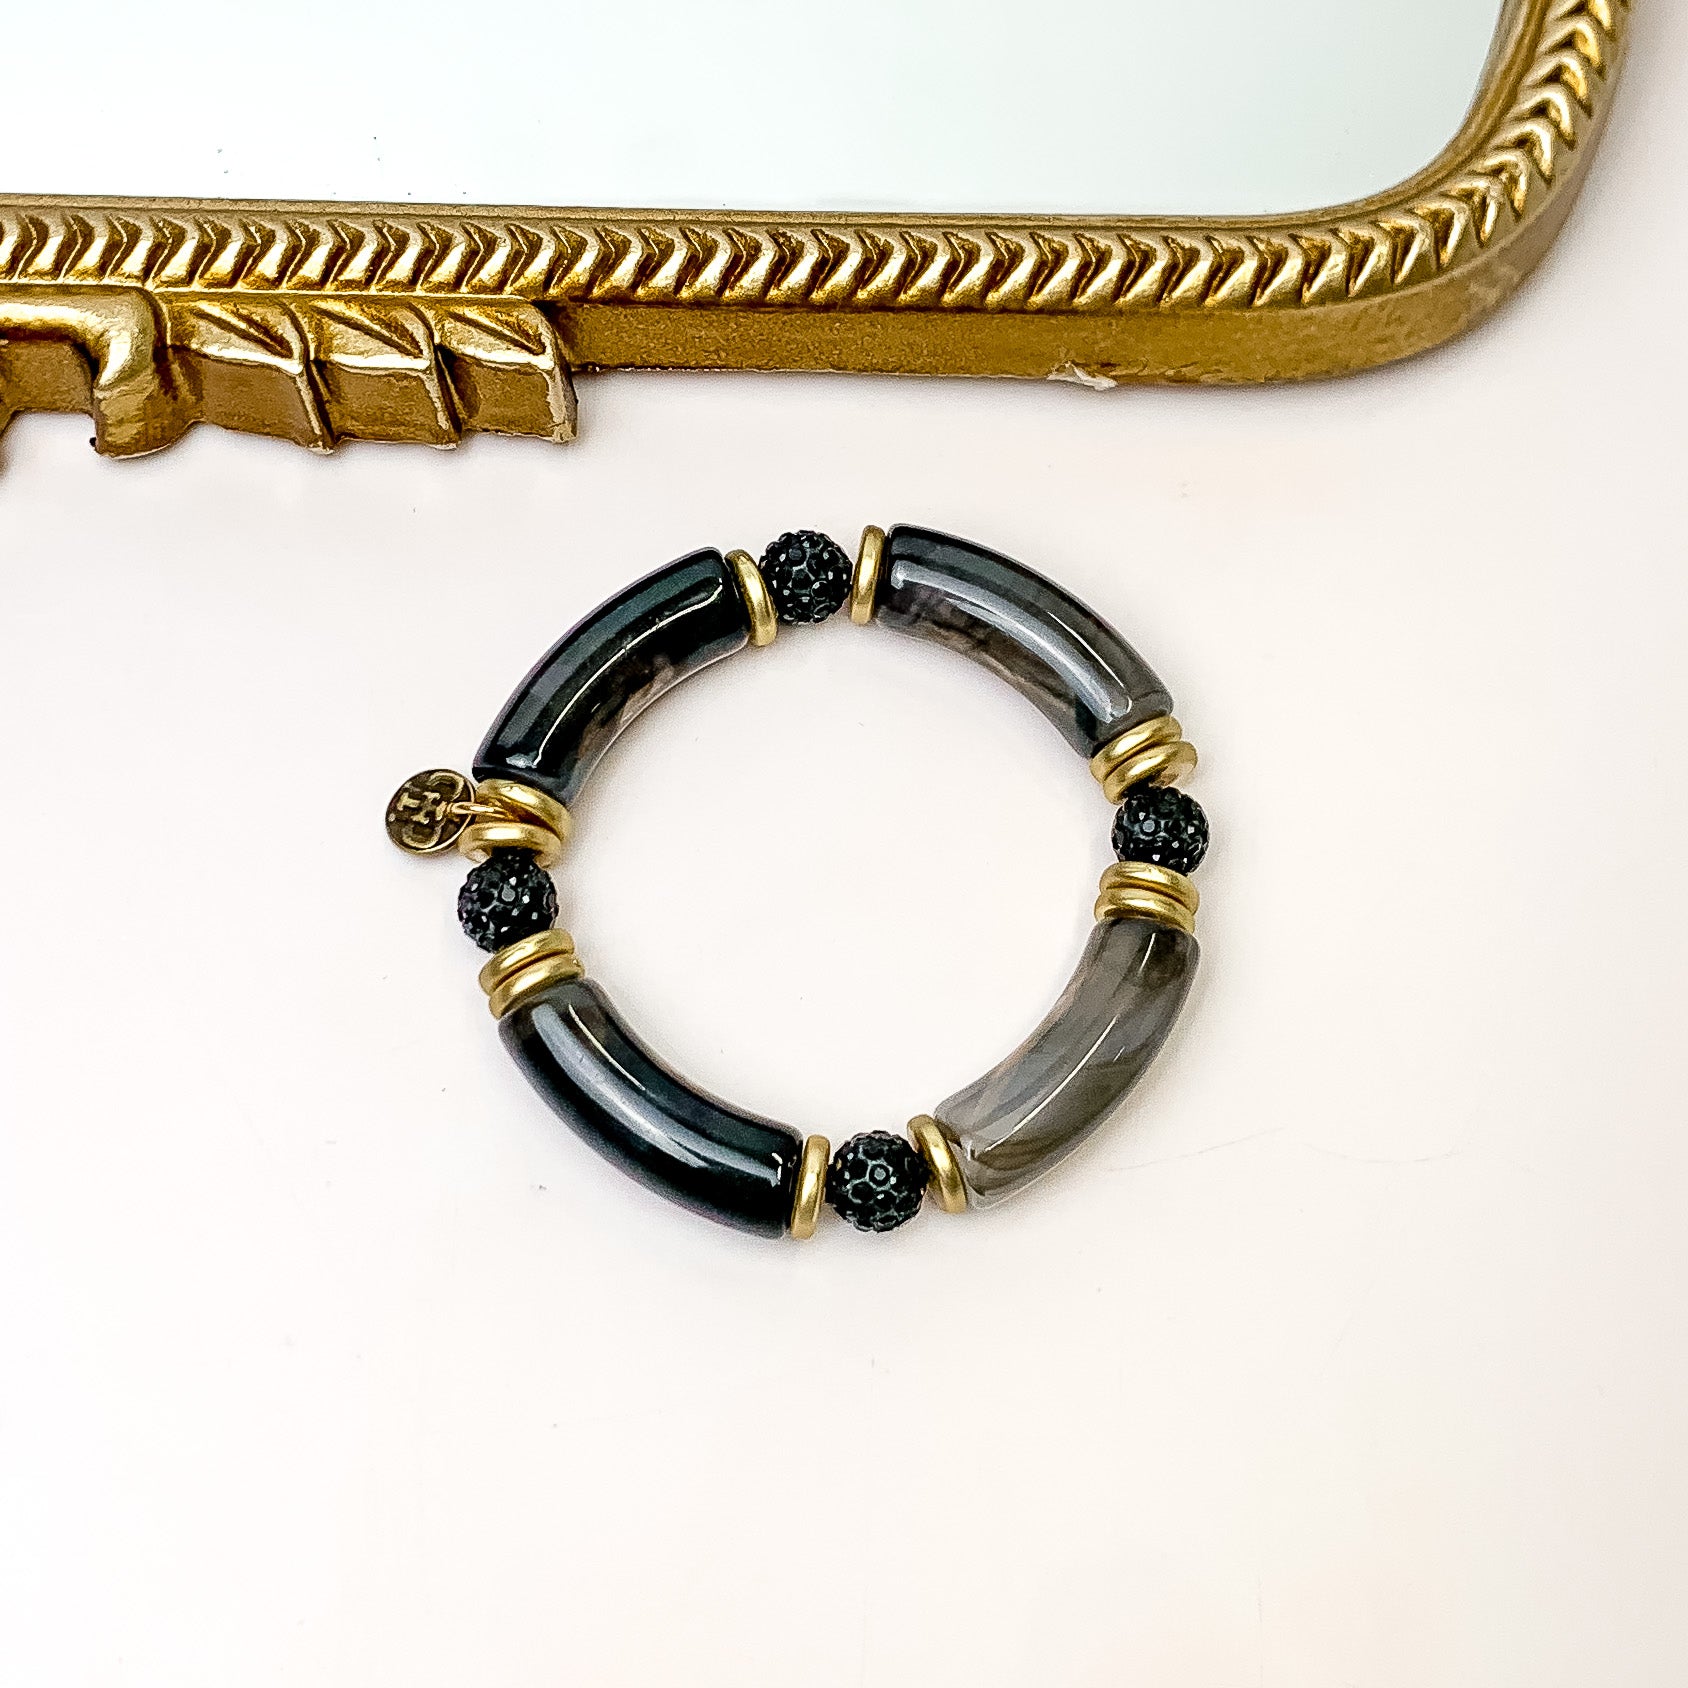 Pictured is one bracelet that has black bamboo beads, gold beads, and black crystal beads. This bracelet is pictured in front of a gold mirror on a white background. 